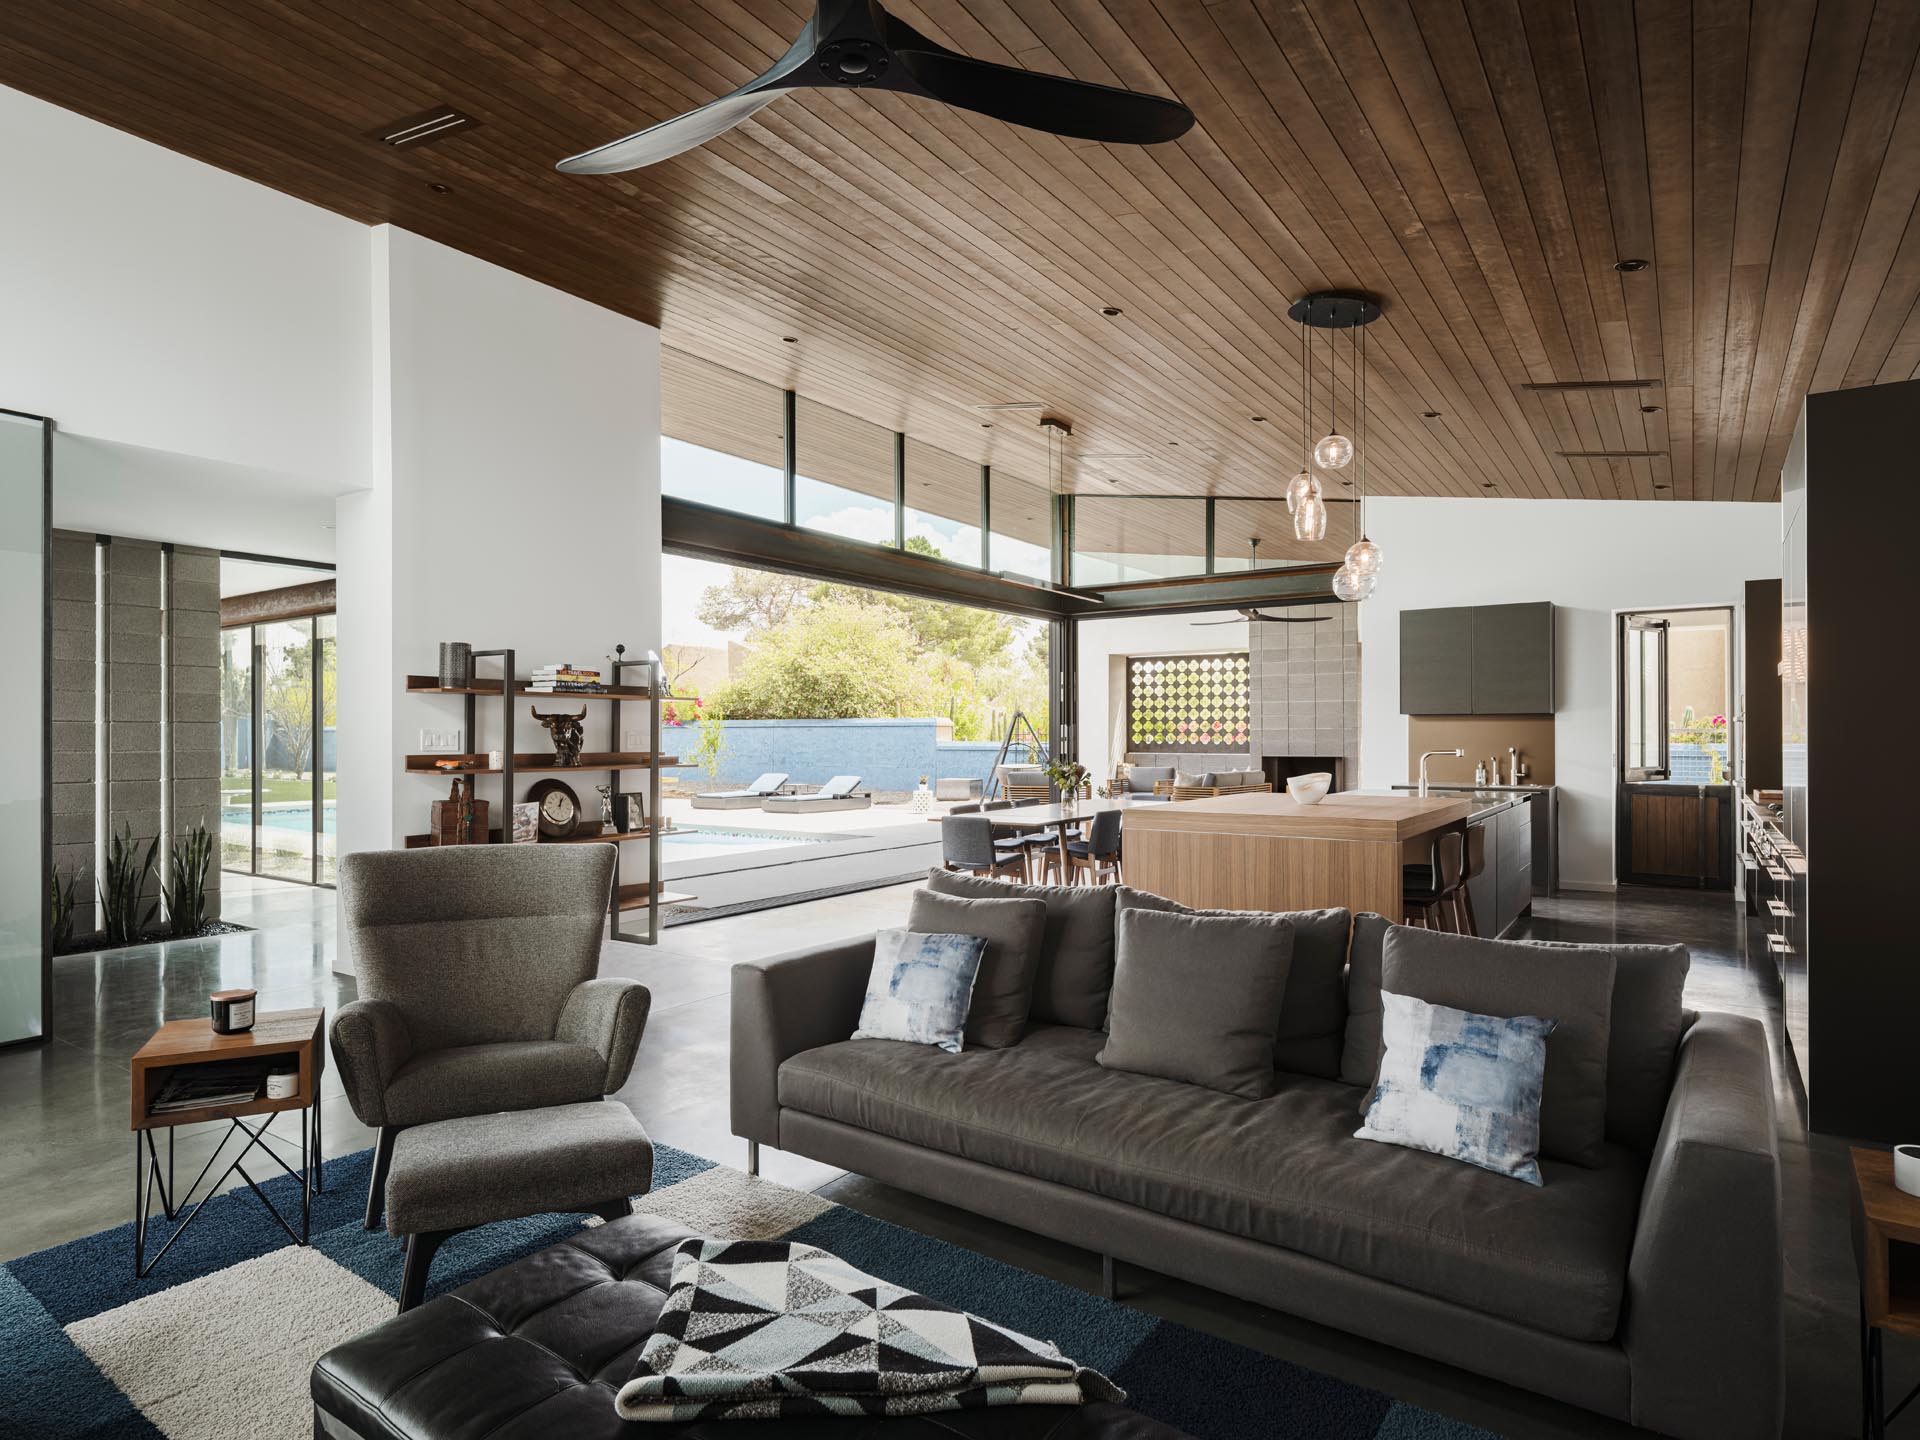 A hemlock clad ceiling spans this great room, which involves the living room, kitchen, and dining room. The ceiling is tilted upwards to take in the views.